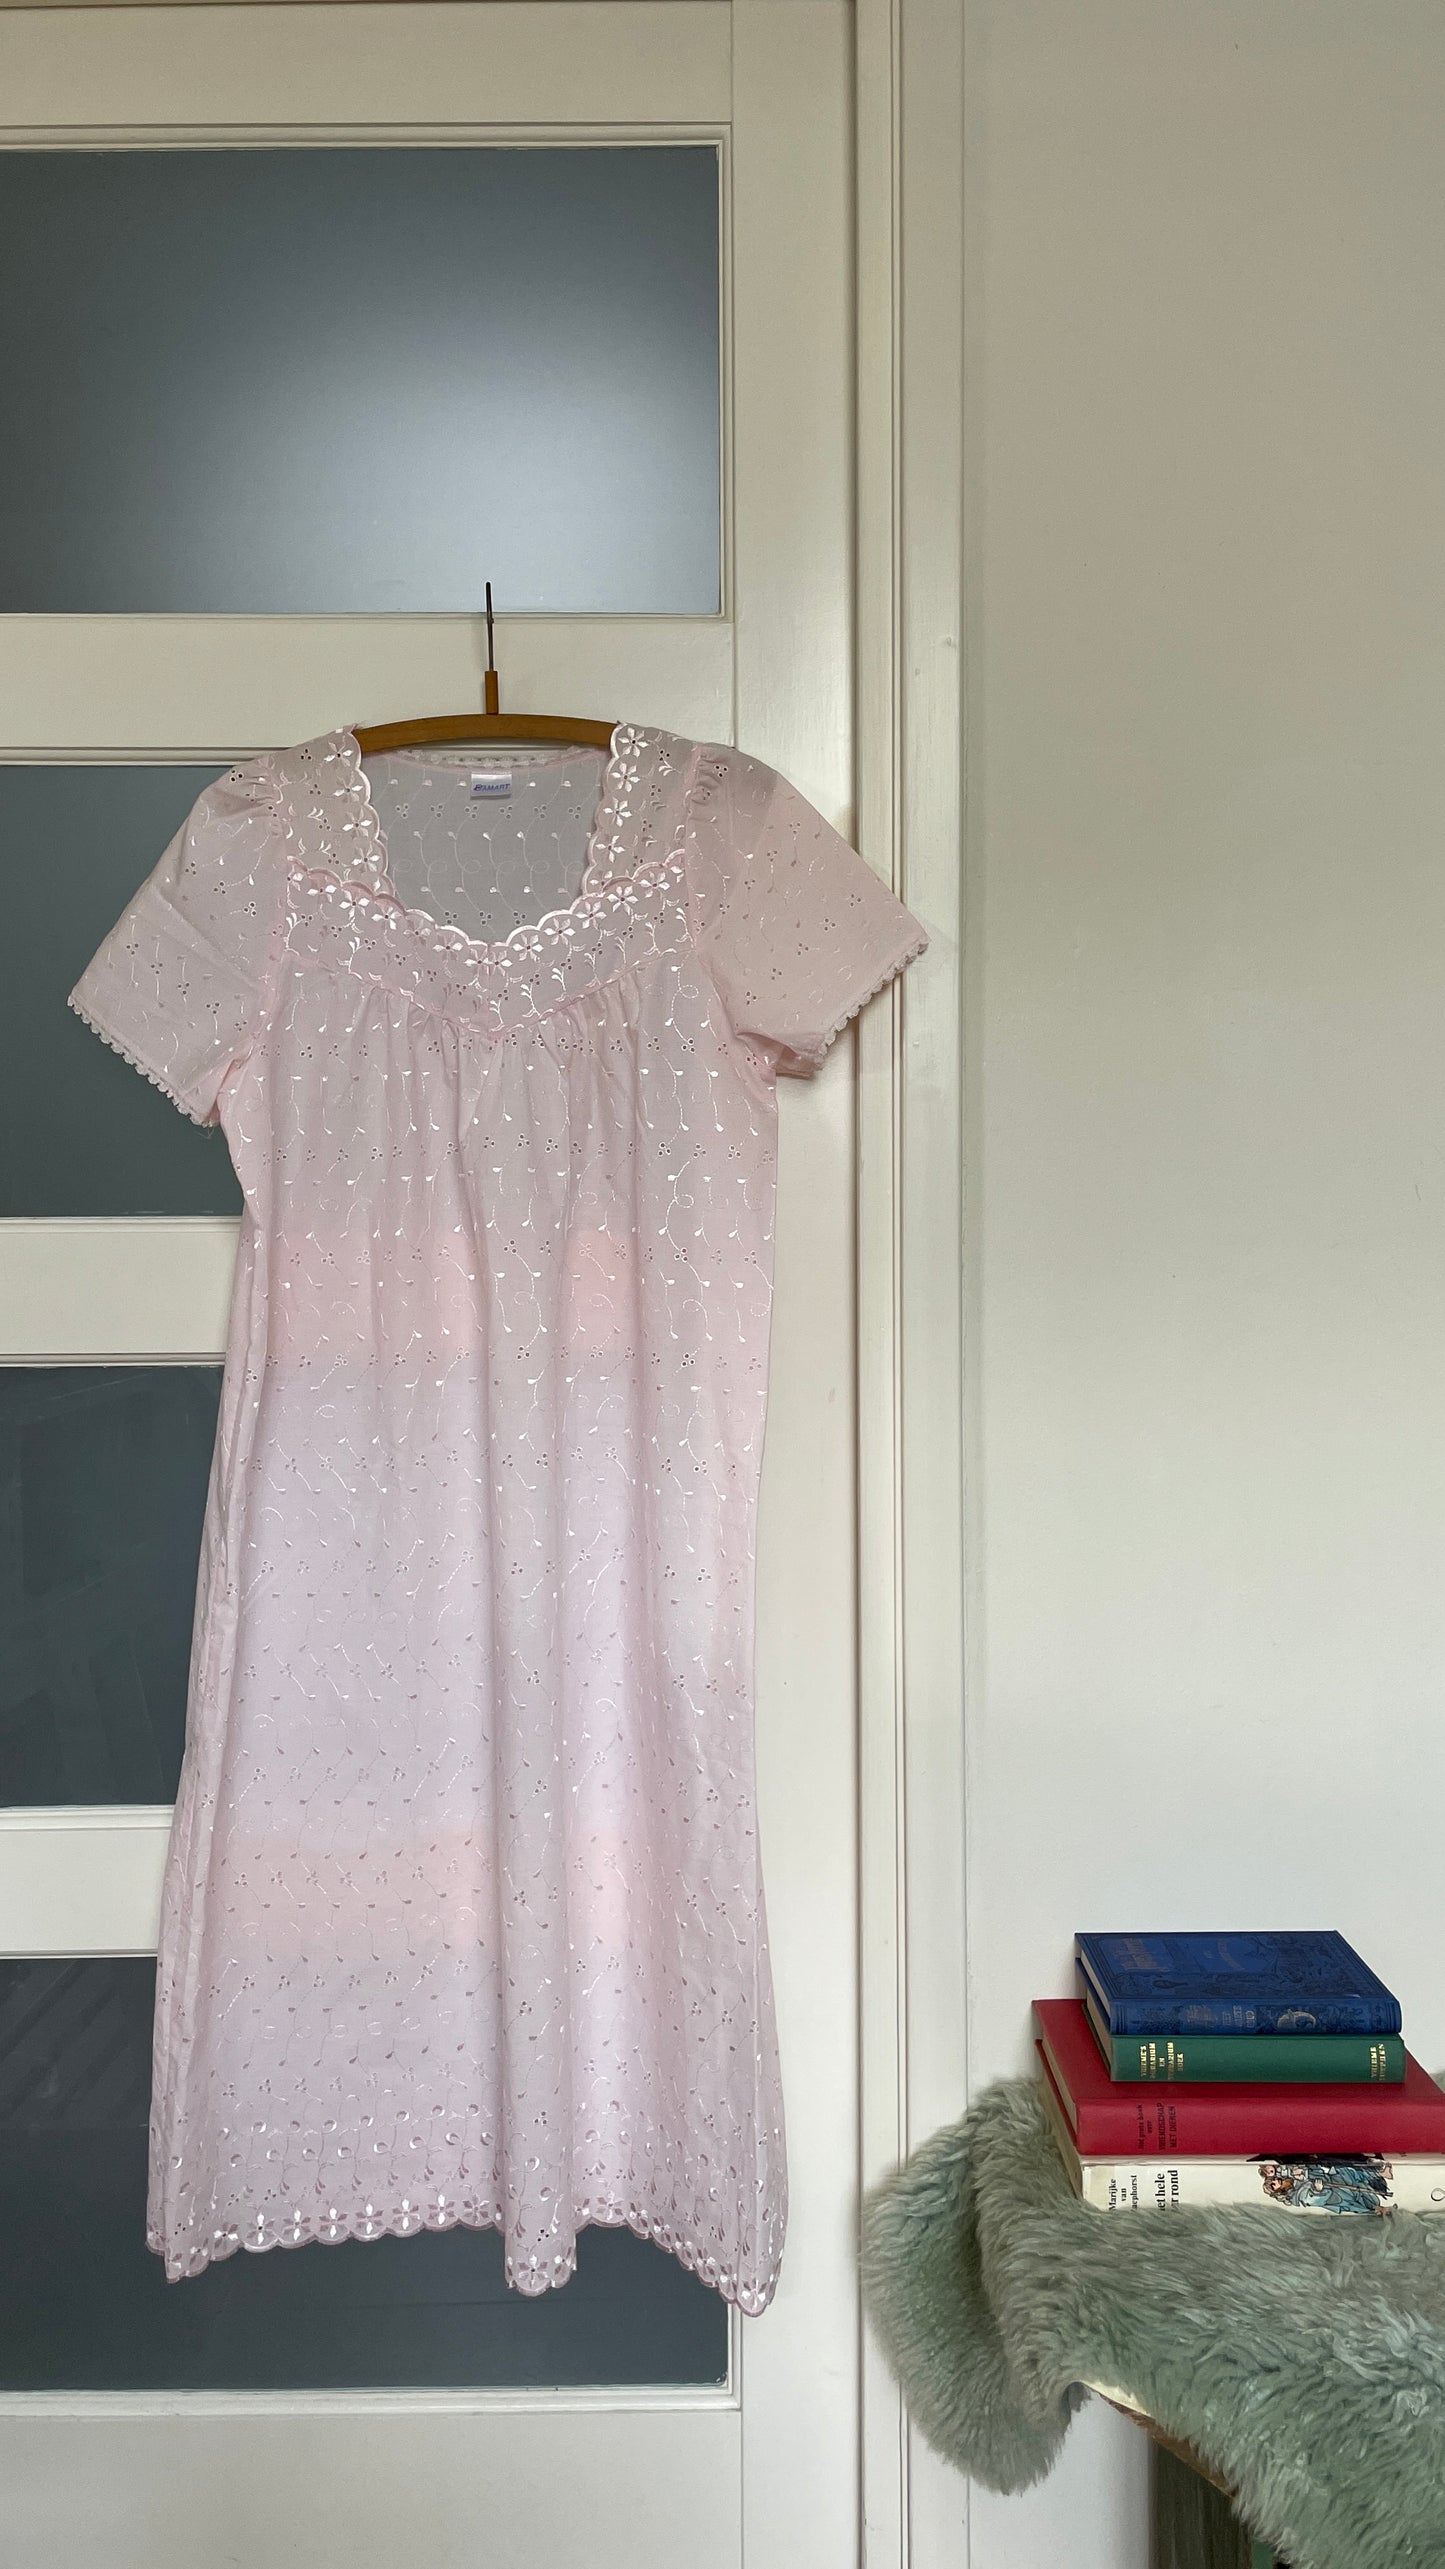 Broderie nightgown